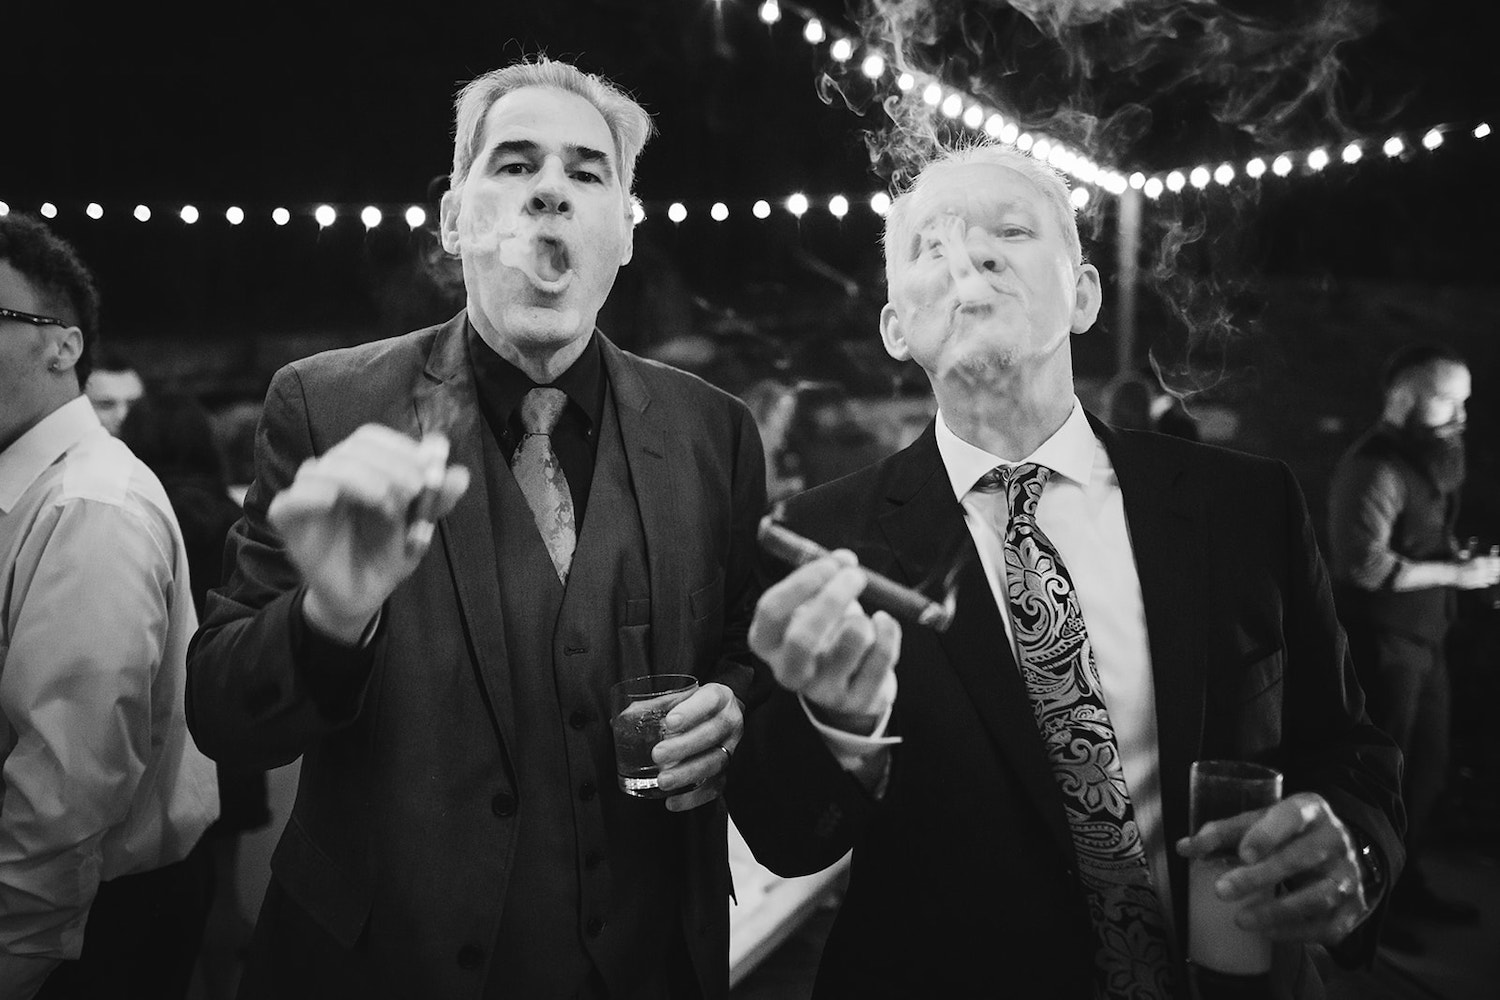 two older men in suits exhale puffs of cigar smoke in the night sky